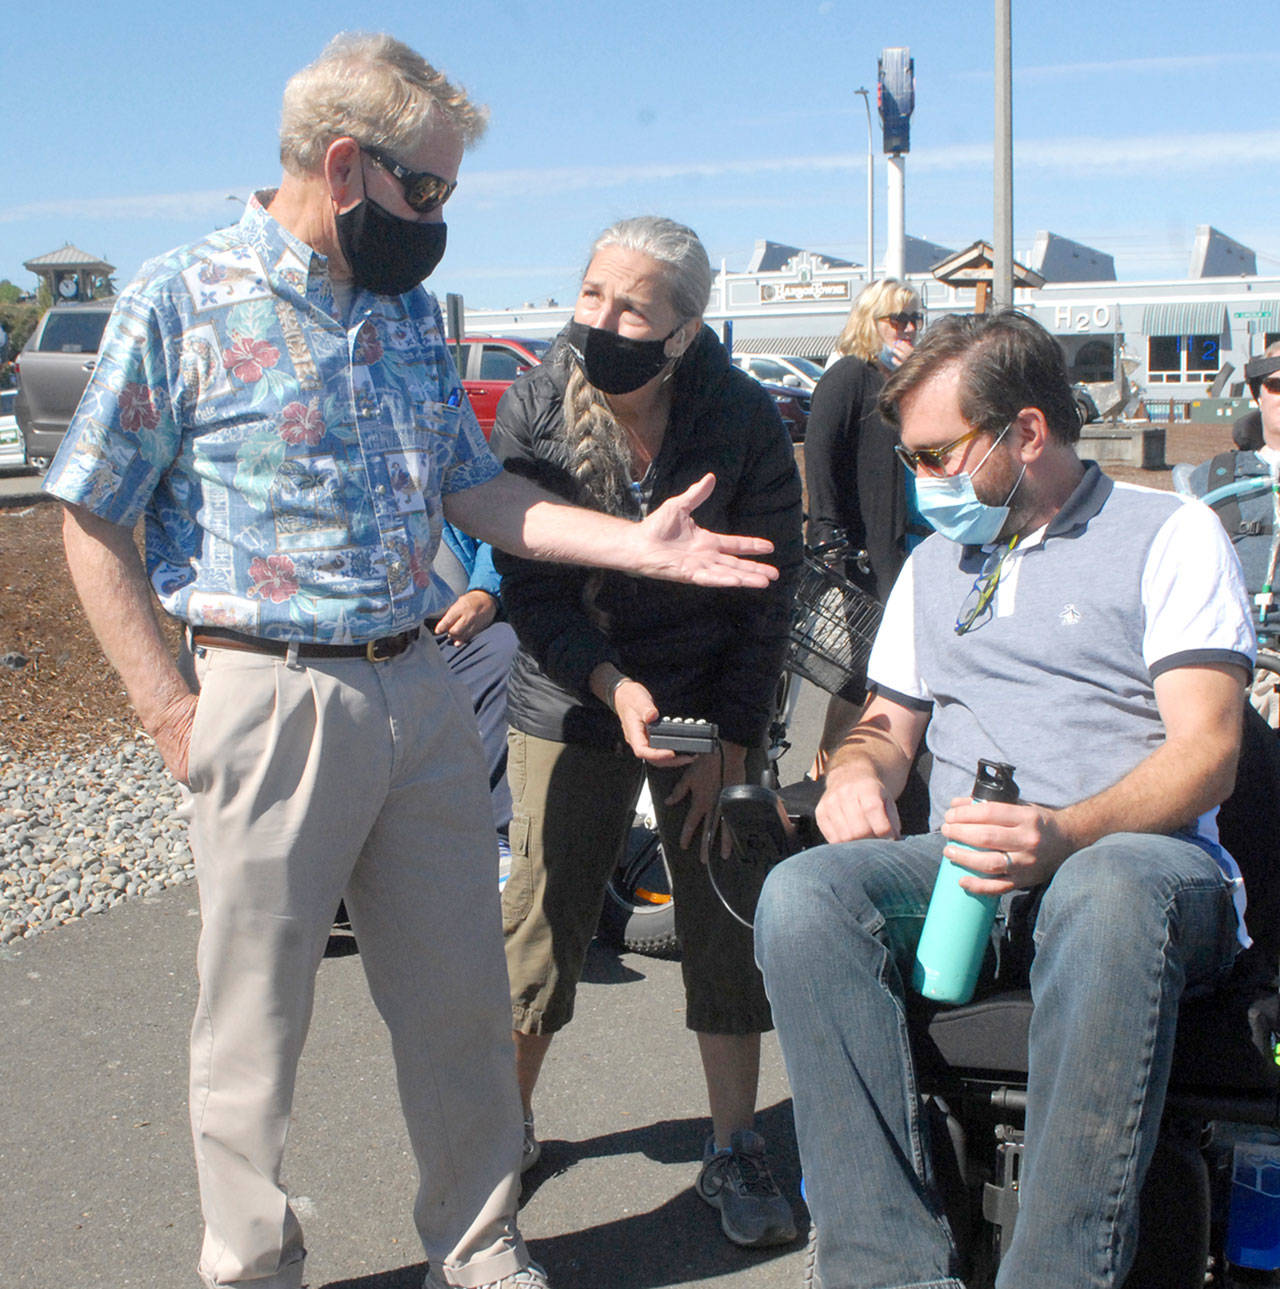 Clallam County Commissioner Randy Johnson, left, speaks with Jefferson County Commissioner Greg Brotherton, seated, as the pair receive motorized wheelchair advice on Saturday from Teena Woodward, mother of Ian Mackay, founder of Ian’s Ride. (Keith Thorpe/Peninsula Daily News)